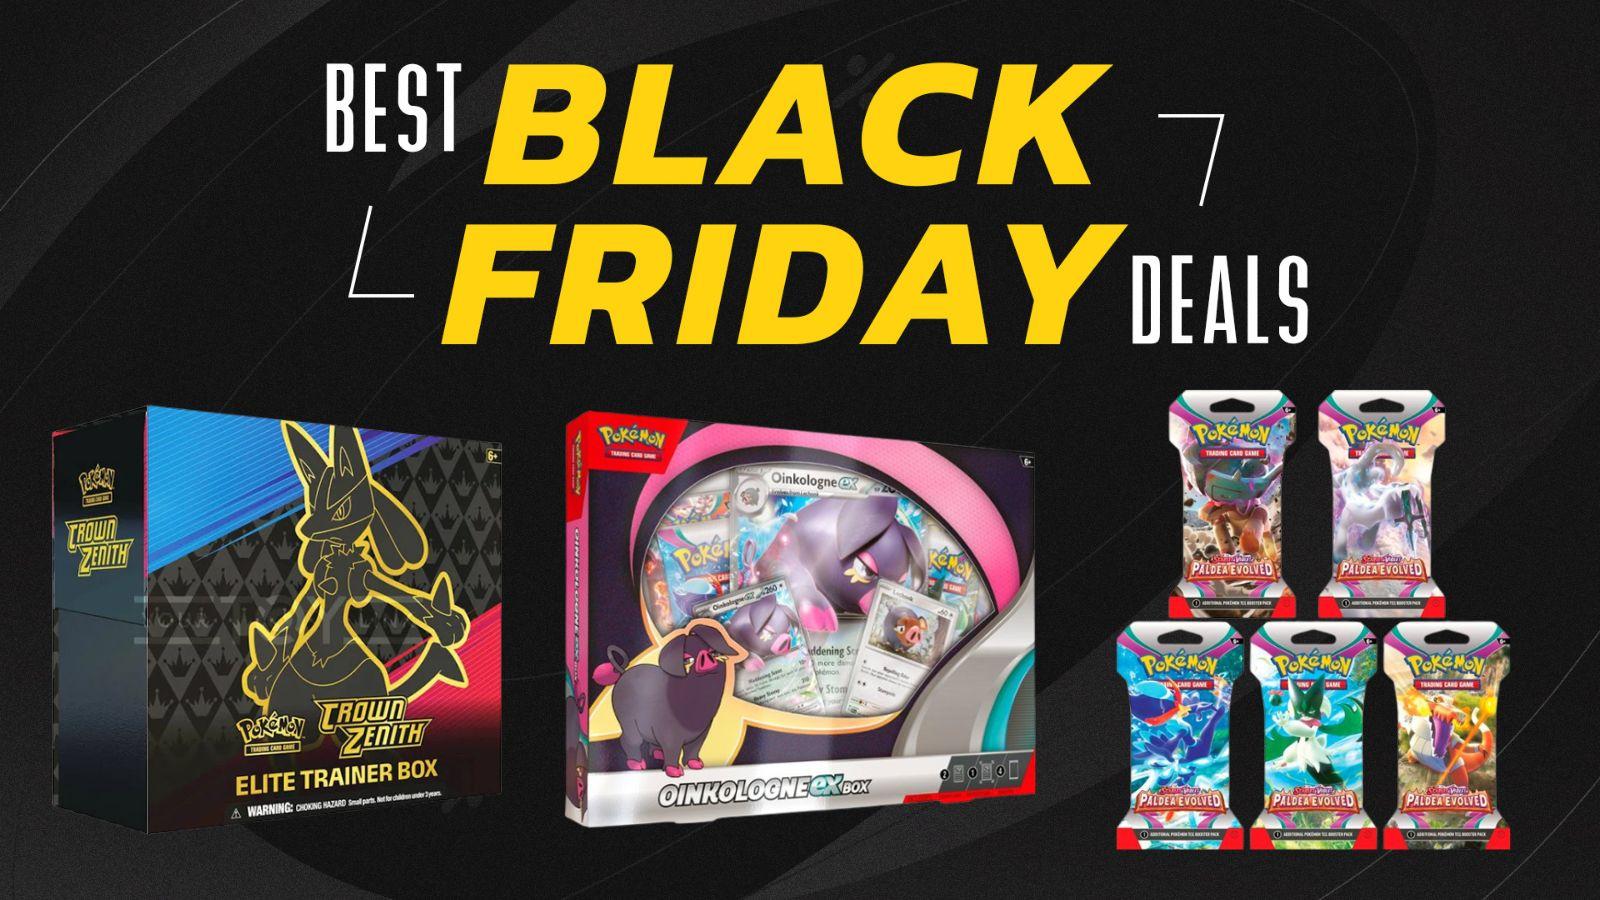 Black Friday Deals banner with Pokemon Crown Zenith box, an Oinkologne ex box and 5 images of blister packs